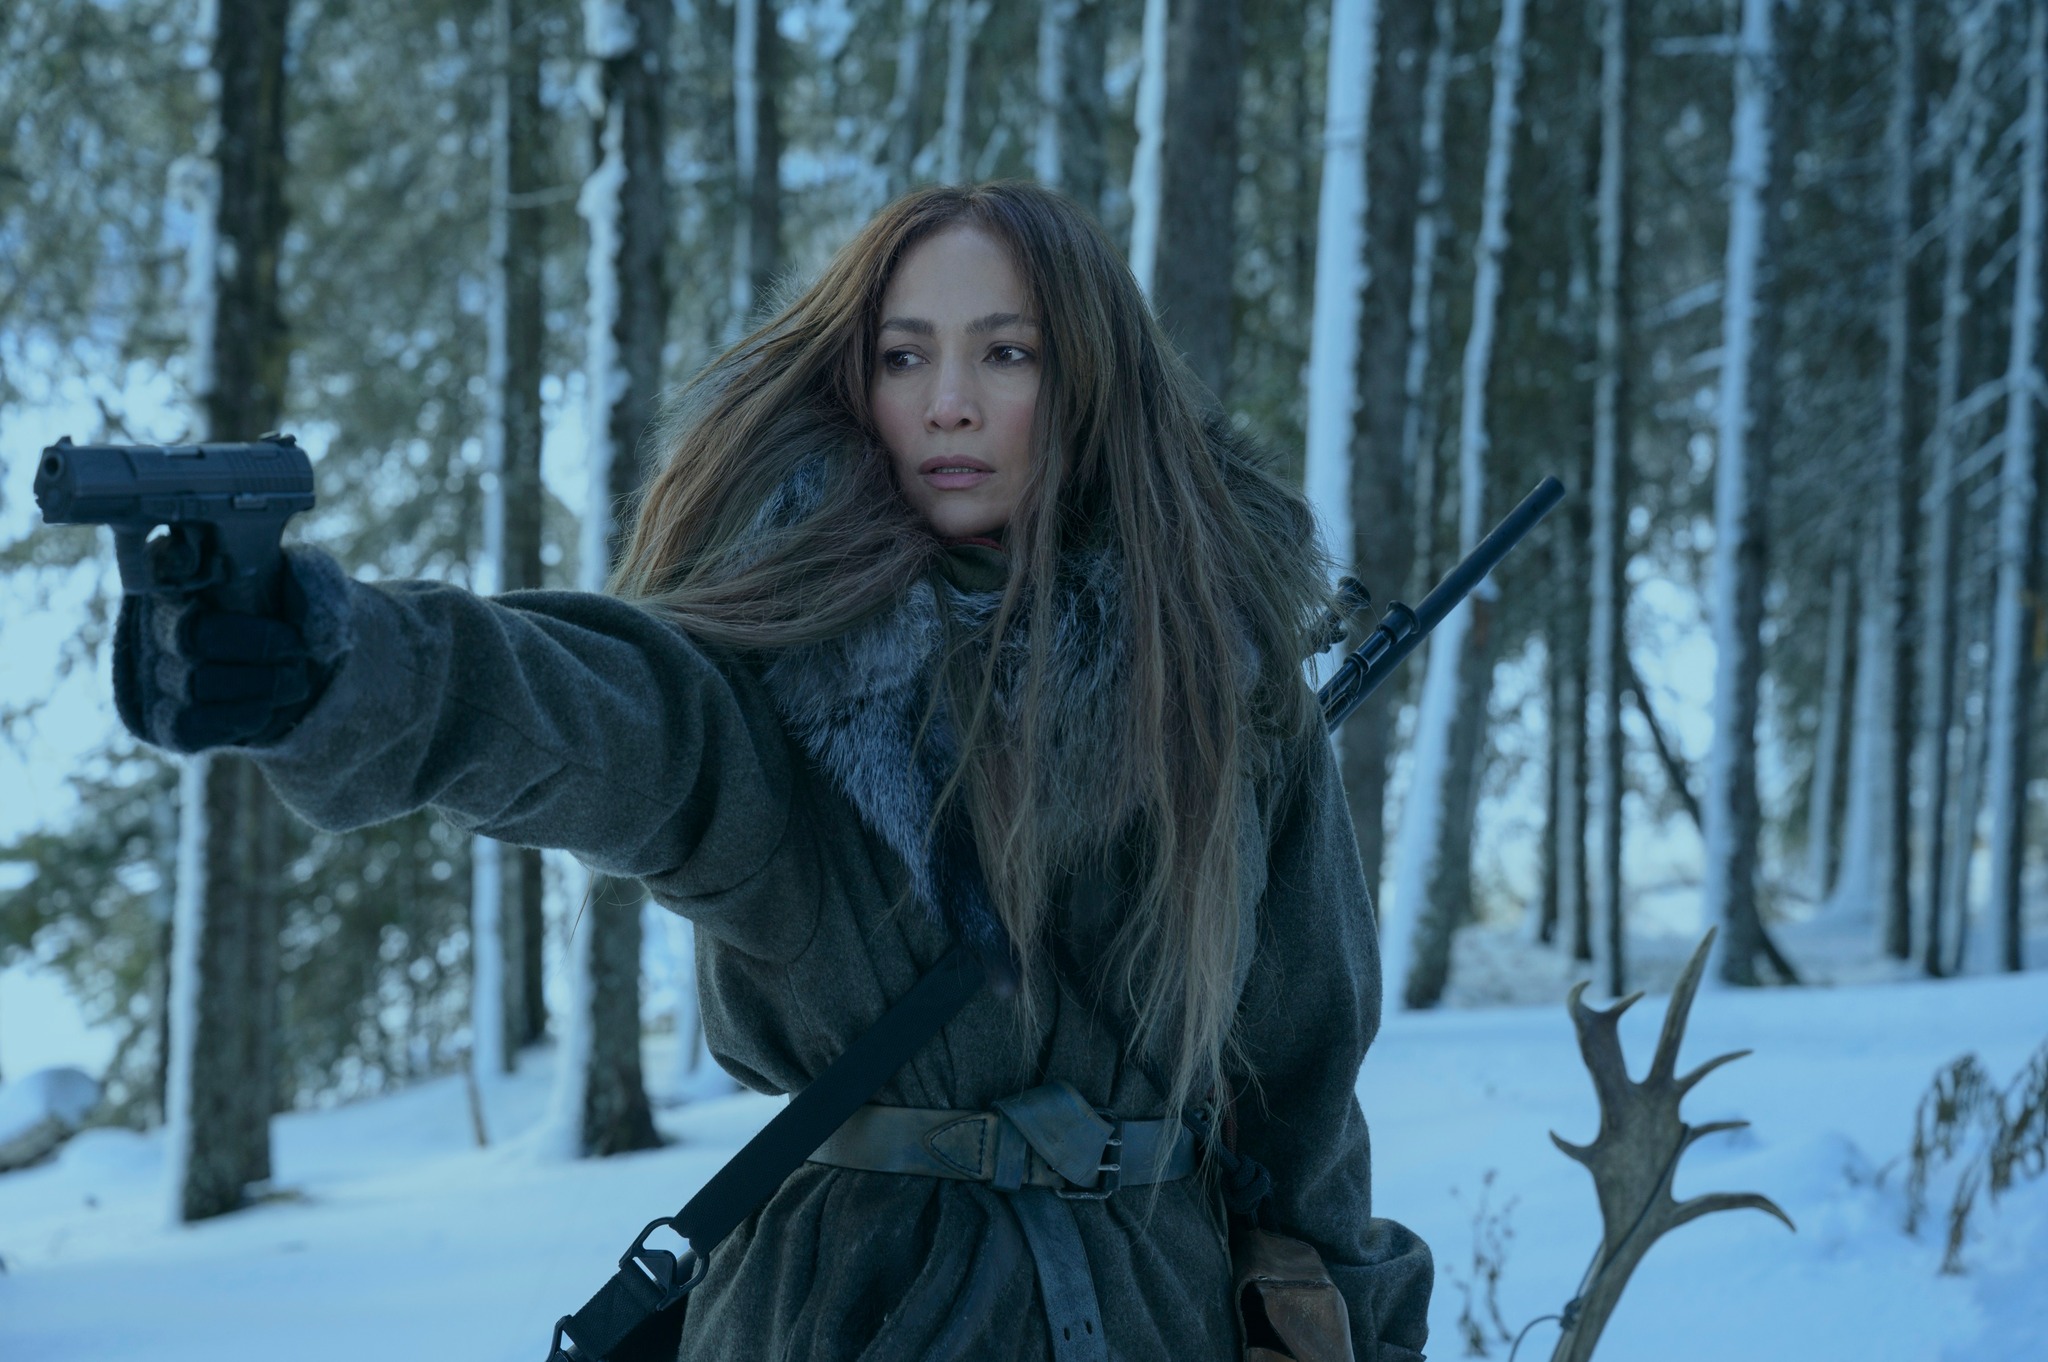 Jennifer Lopez stands in the snowy woods pointing a gun in the film The Mother